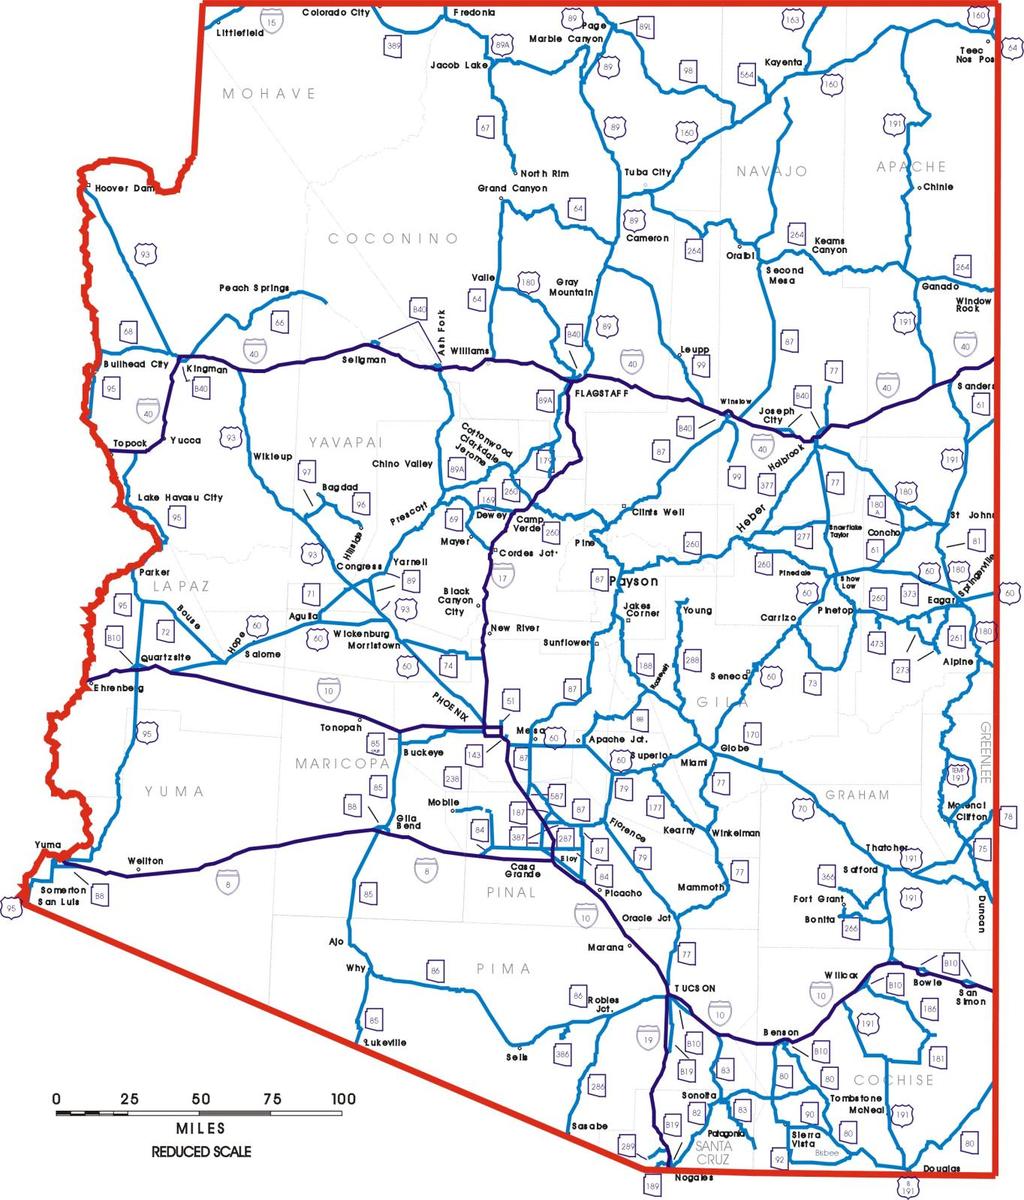 1.1 Forward The Arizona Department of Transportation (ADOT) in cooperation with the Federal Highway Administration (FHWA) prepared a Feasibility Study to identify and evaluate alternatives for the